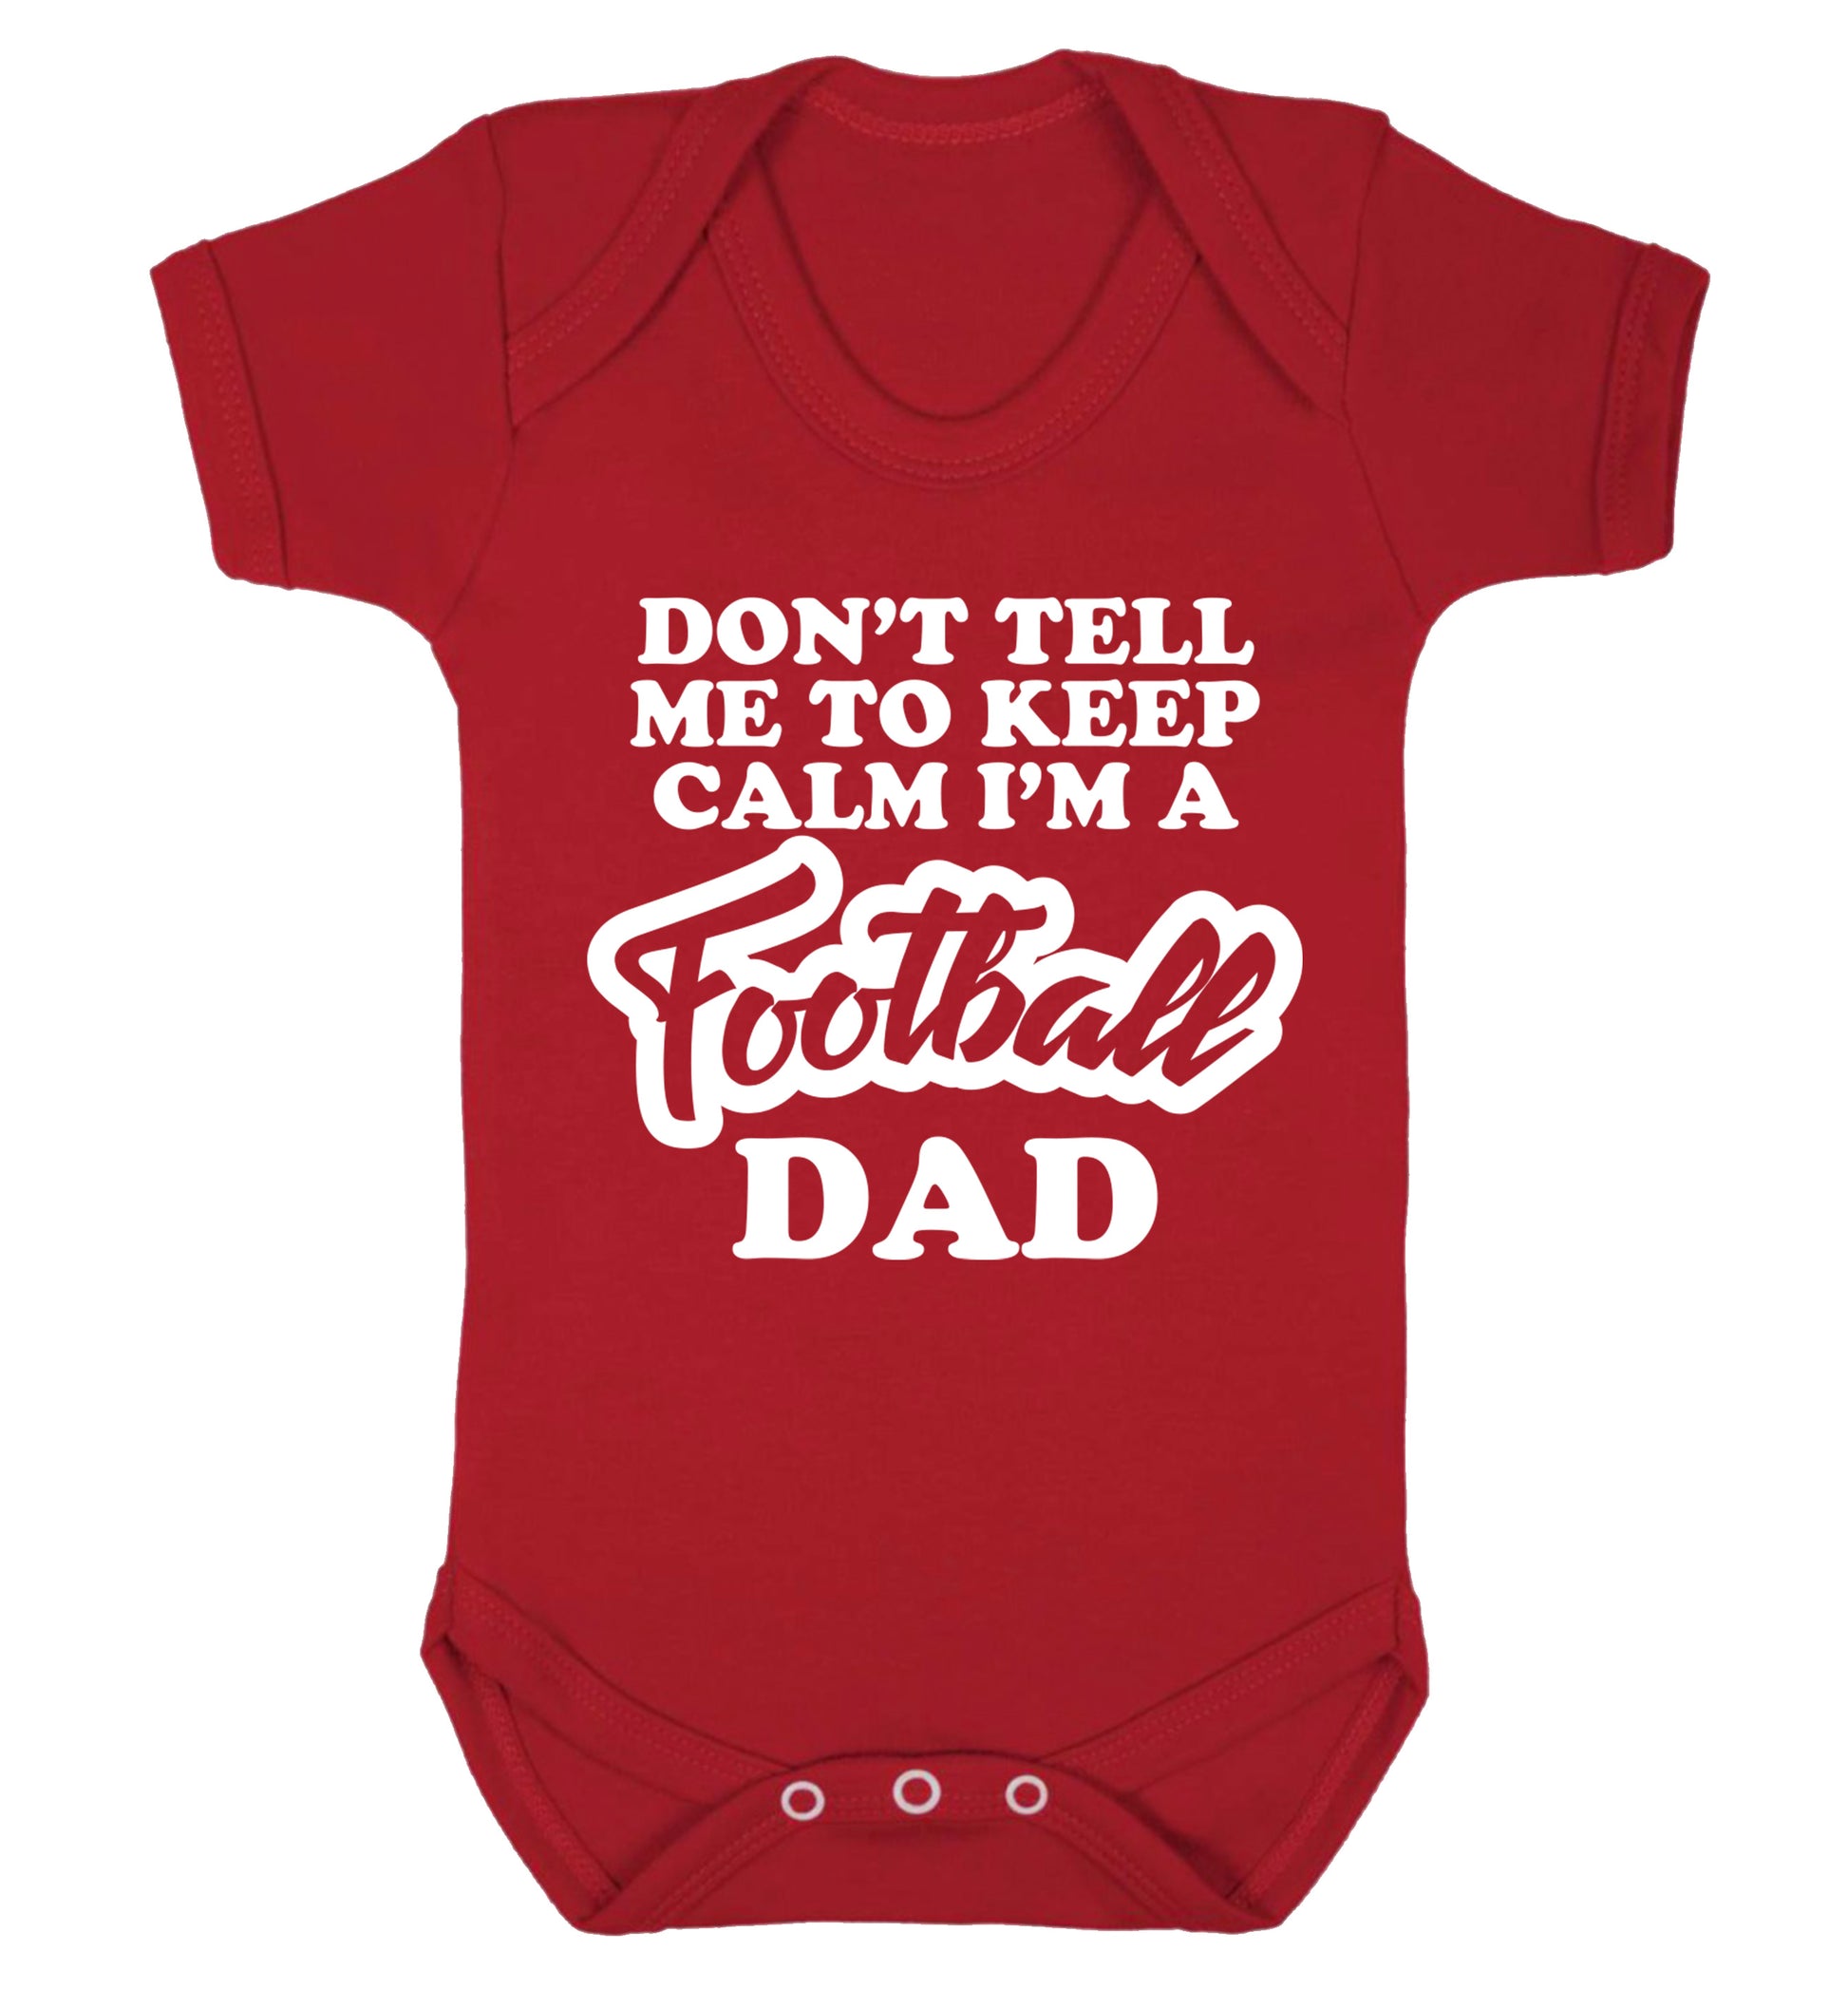 Don't tell me to keep calm I'm a football dad Baby Vest red 18-24 months